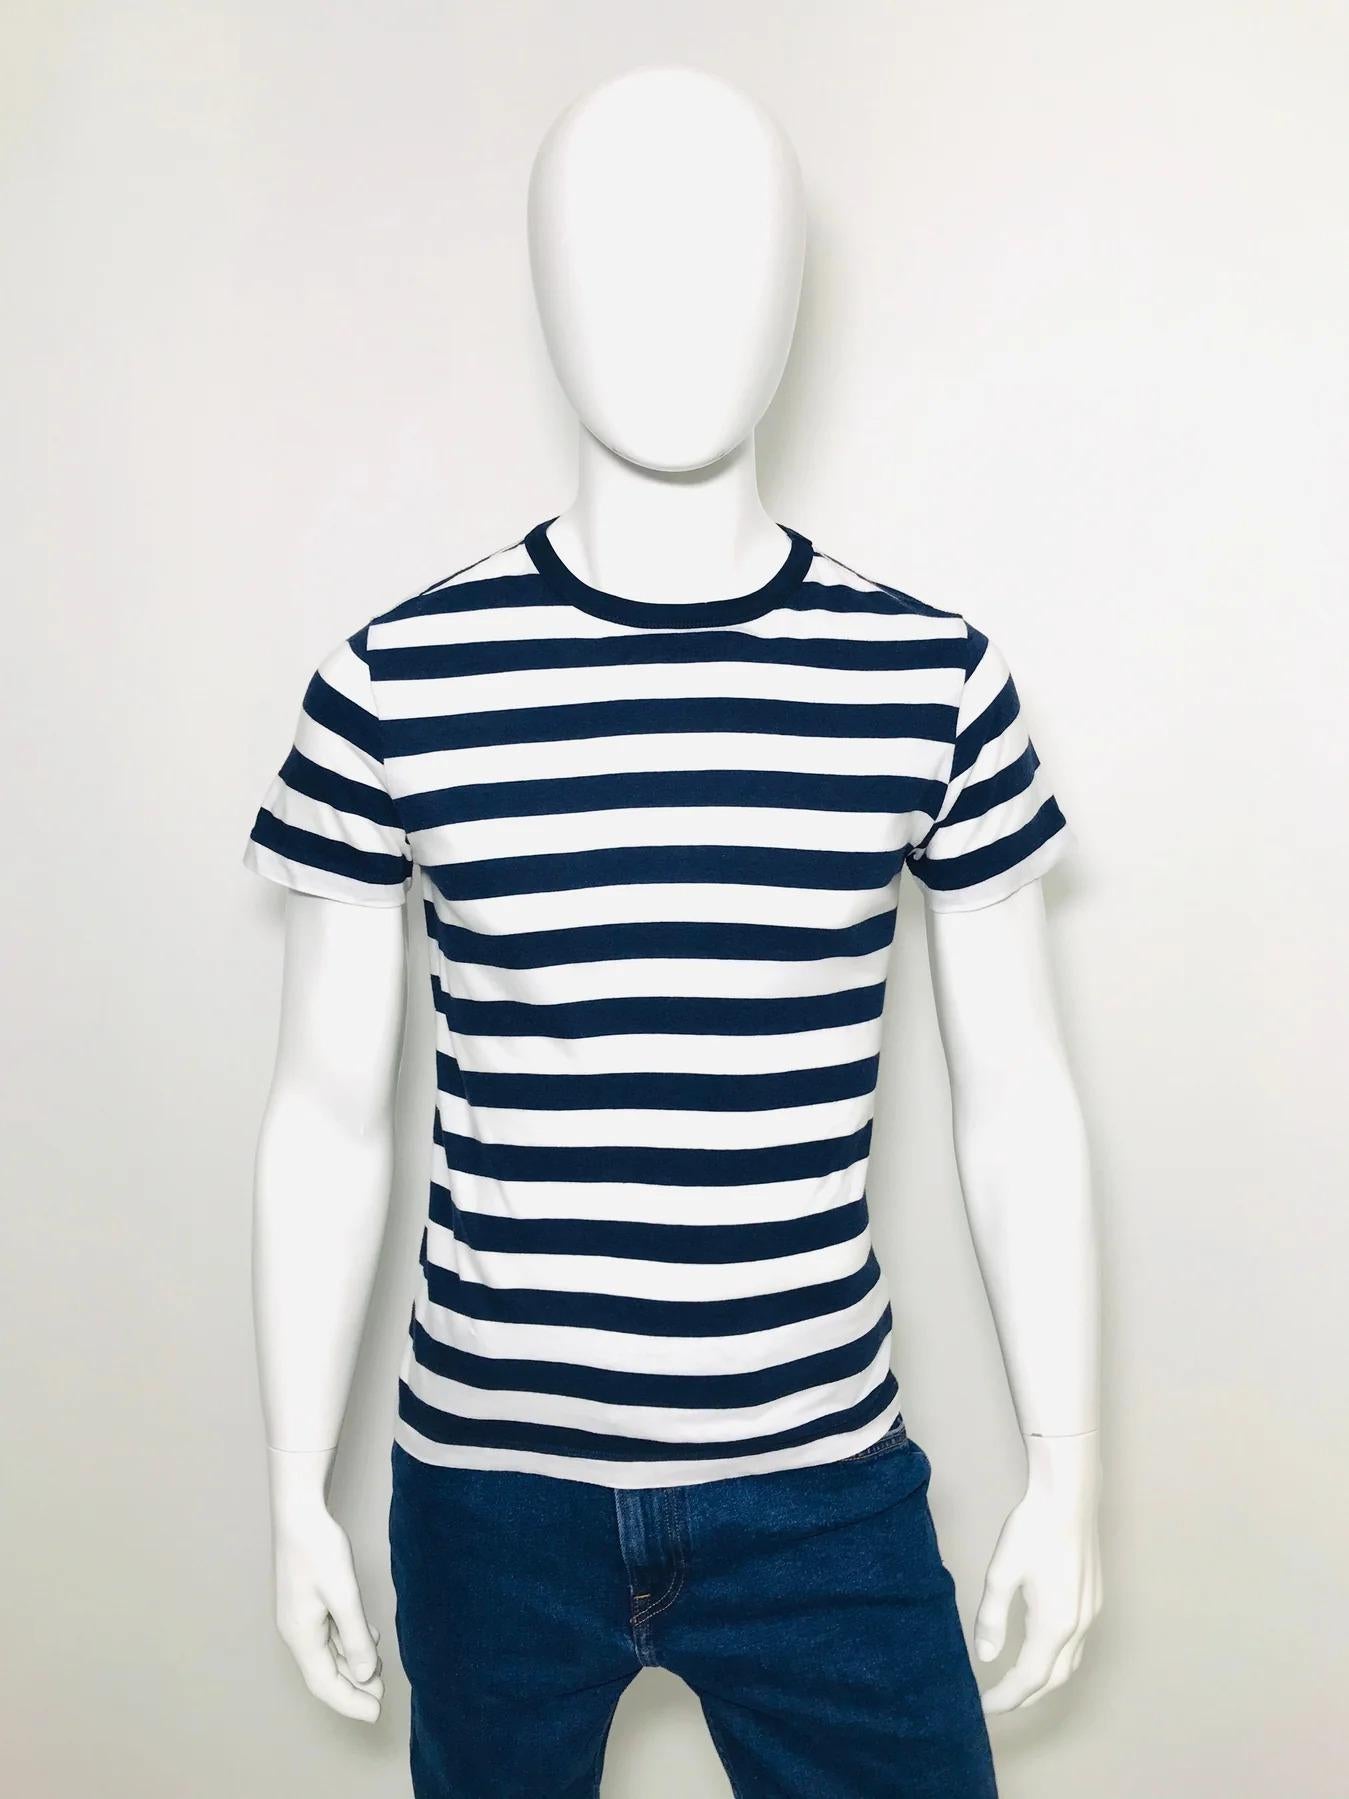 Officine Generale T Shirt

Navy blue and white stripes. Navy ribbed neckline.

Additional information:
Size – XS
Composition - Cotton
Condition – Very Good